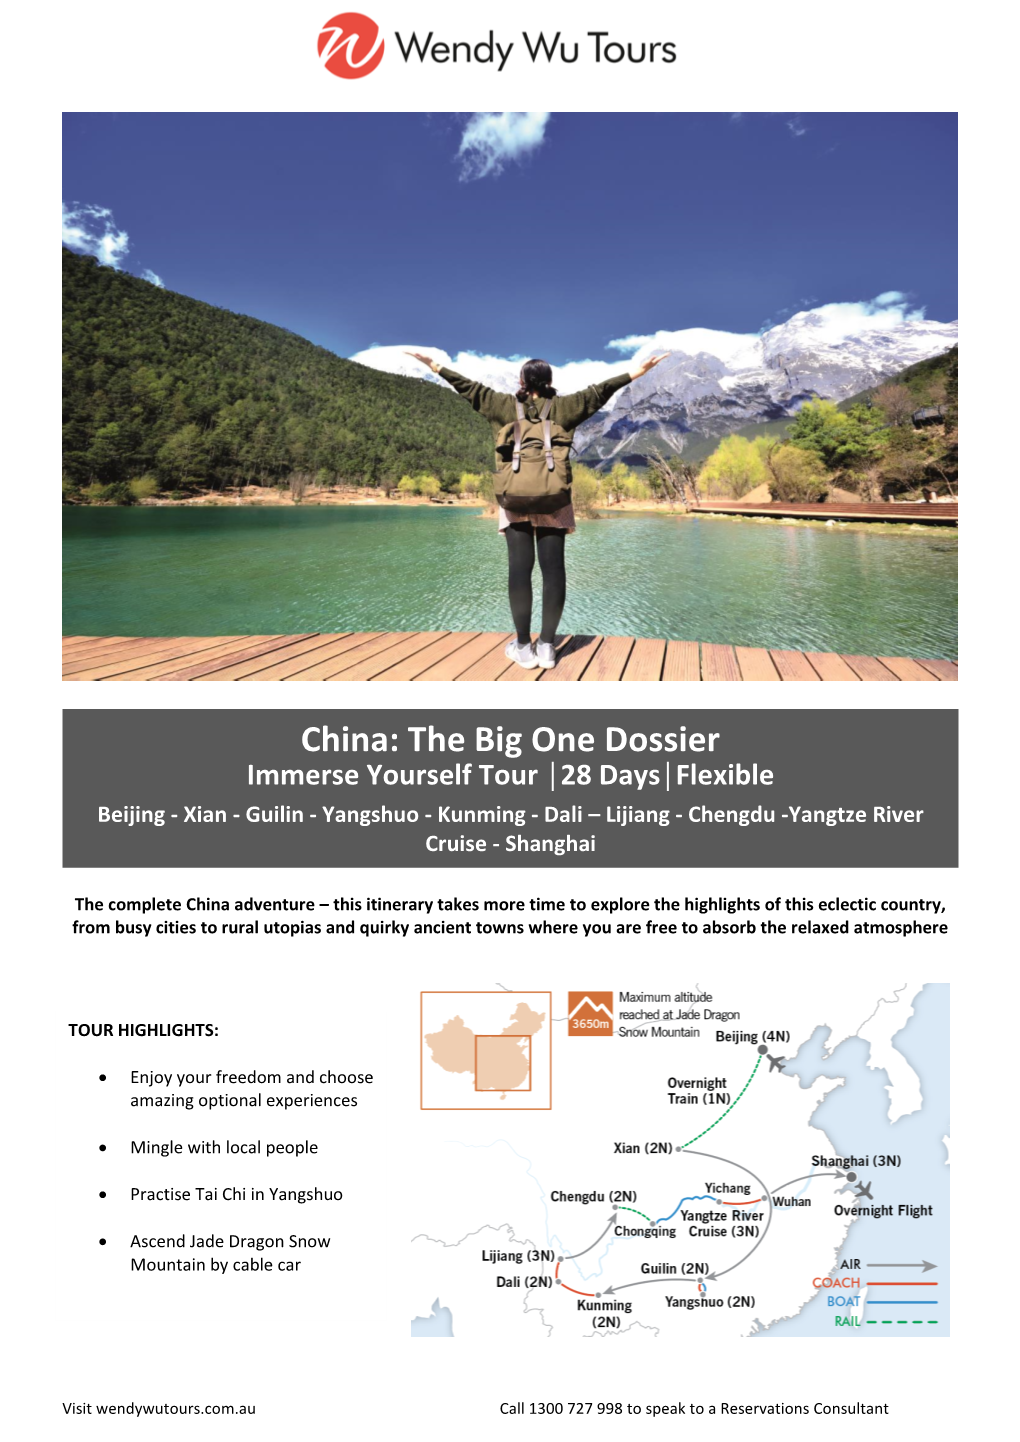 China: the Big One Dossier